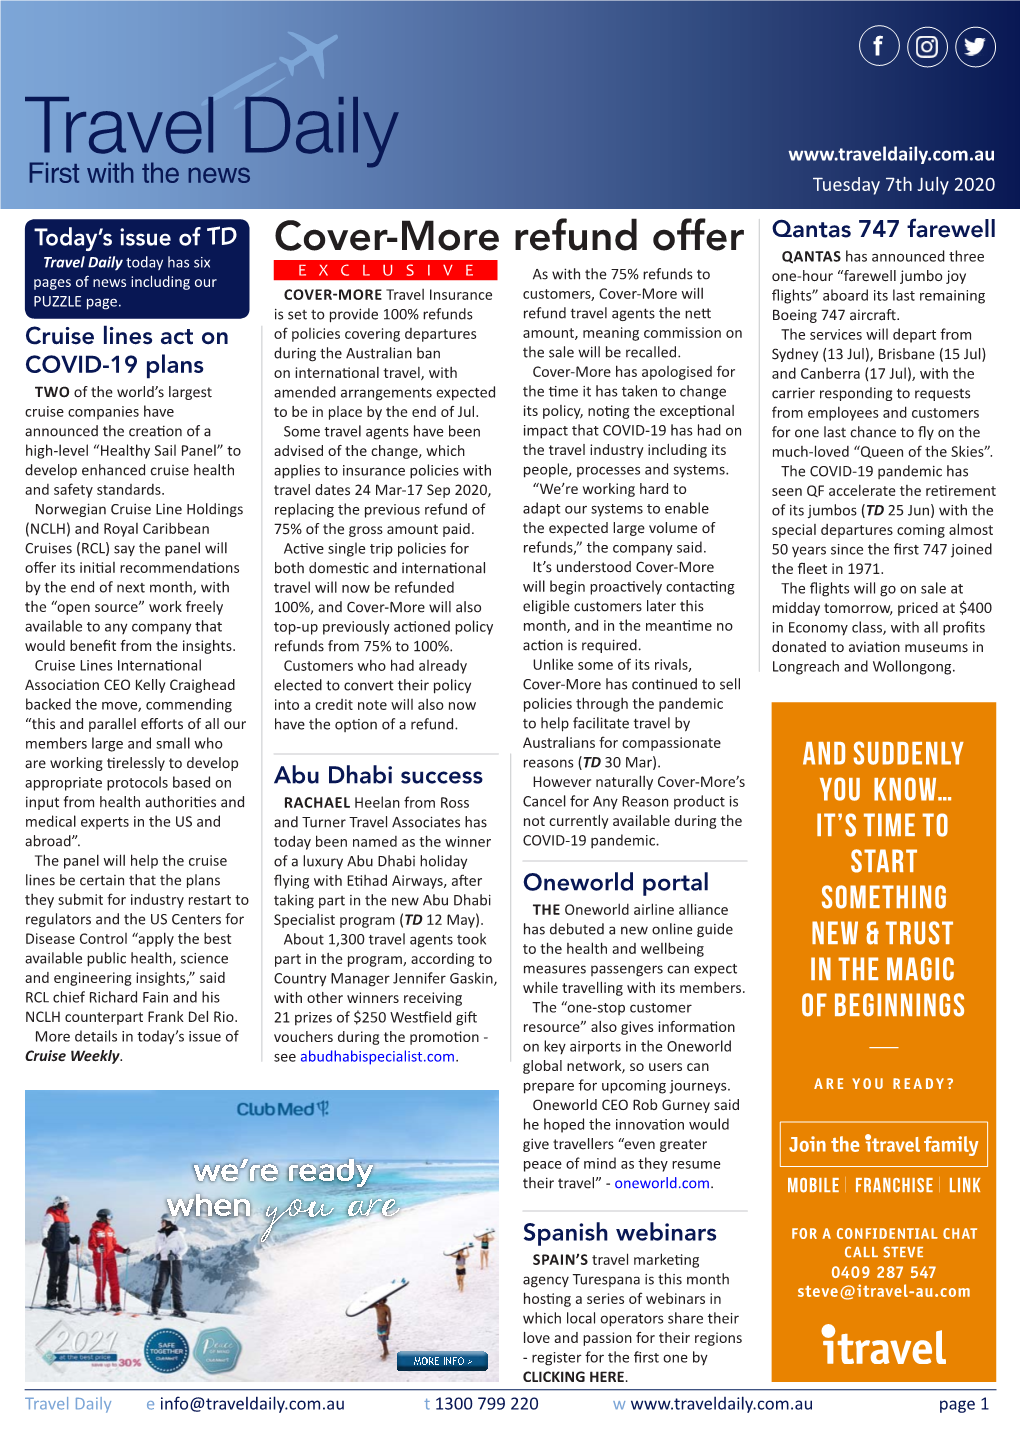 Cover-More Refund Offer